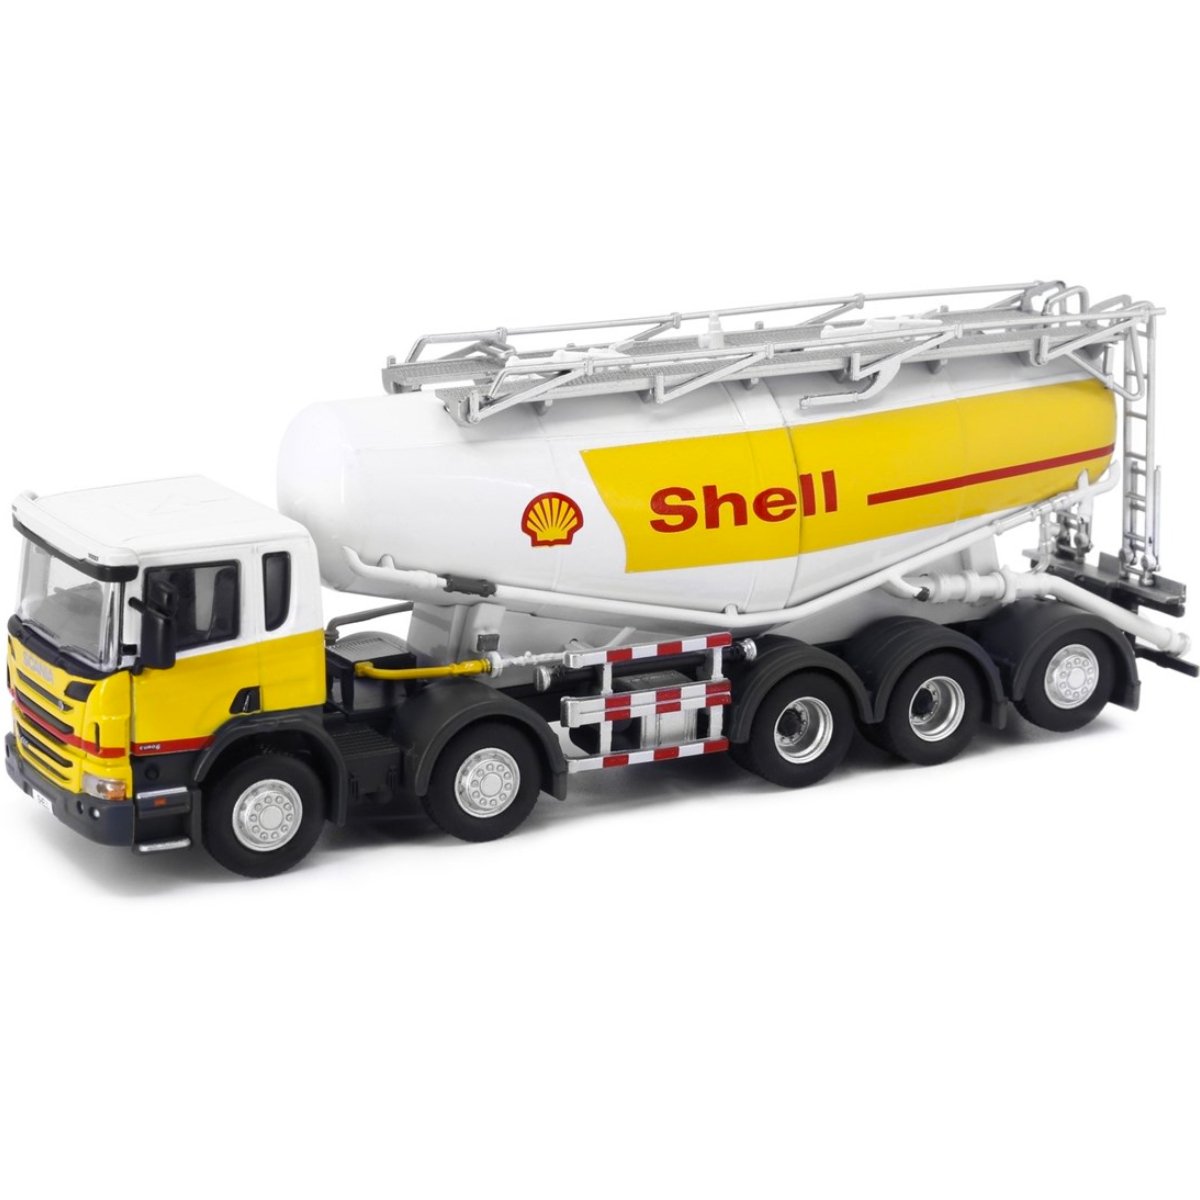 Tiny Models Scania P-Series Shell Powder Tanker Truck (1:76 Scale) - Phillips Hobbies